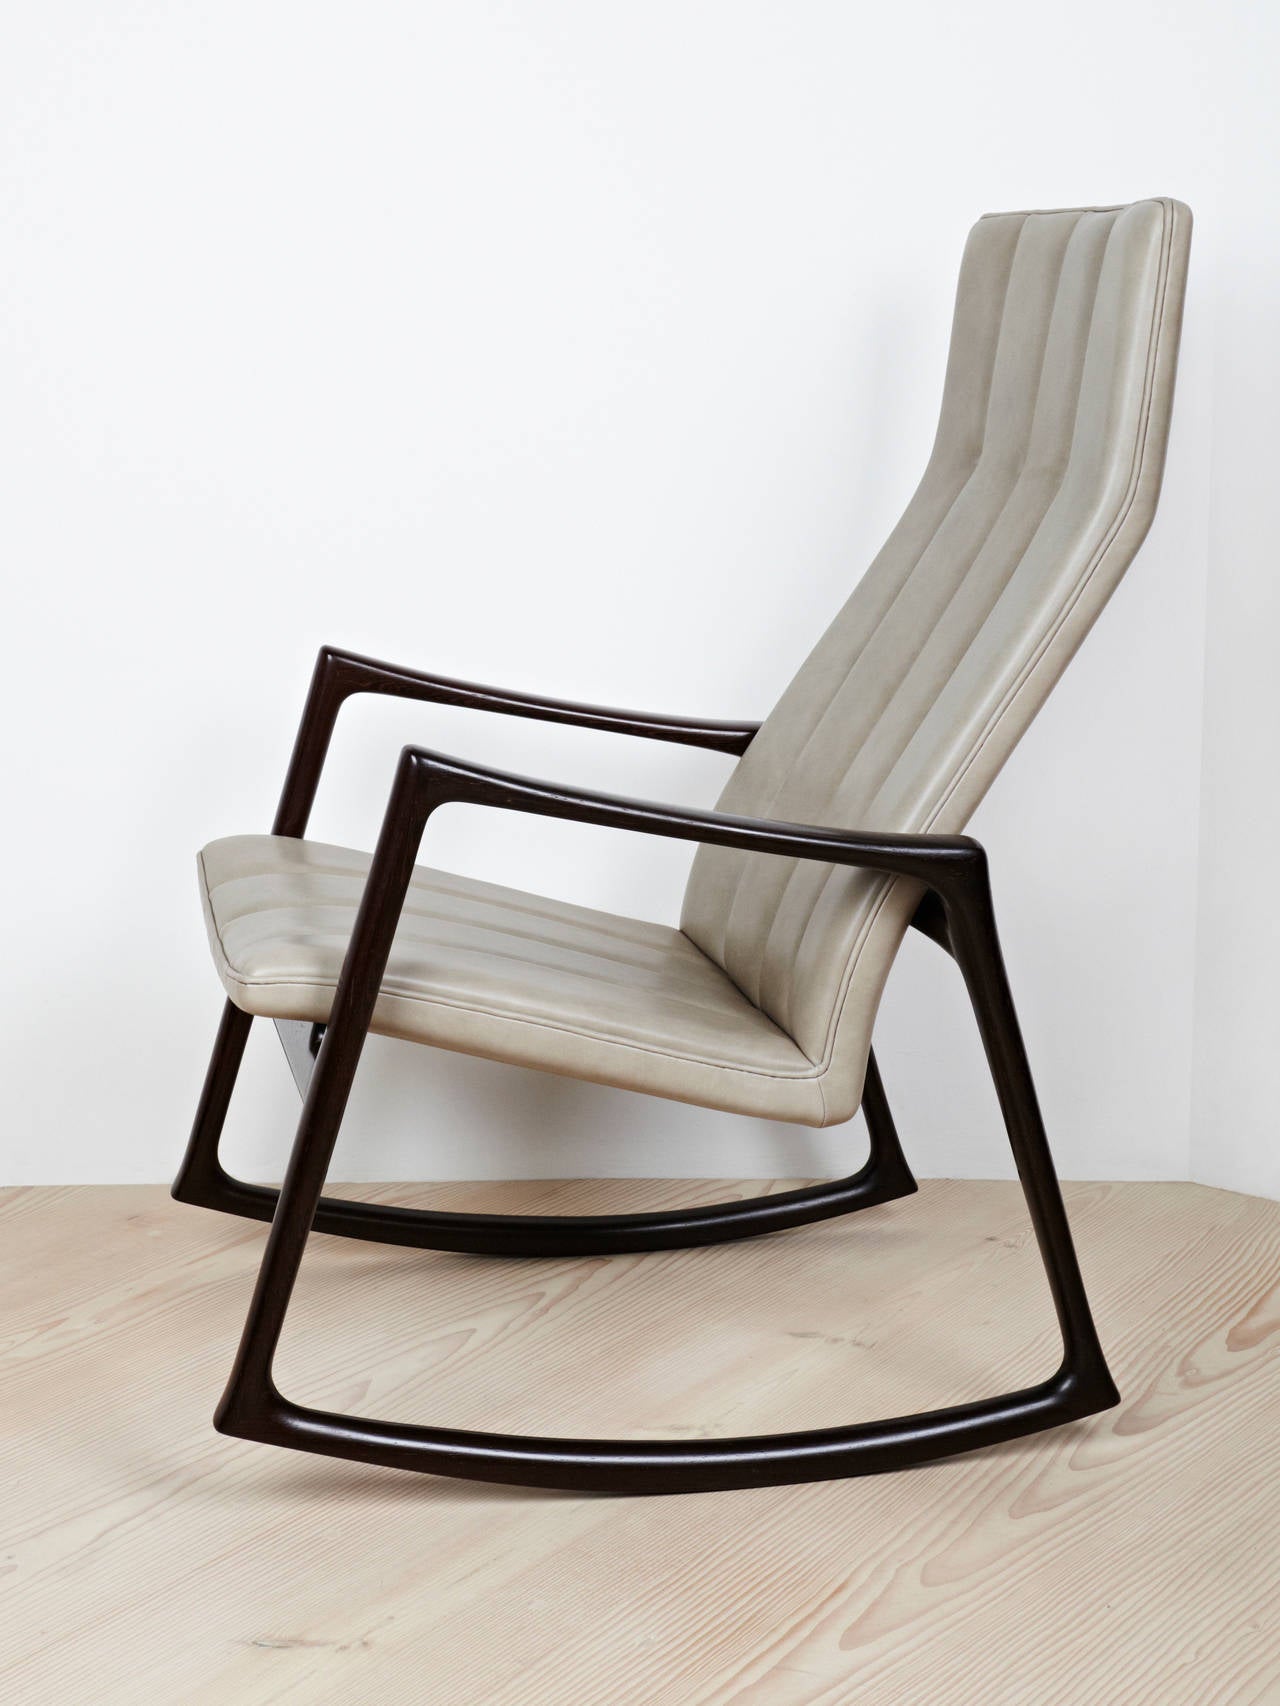 This rocking chair designed by Helge Vestergaard Jensen in 1961 was made under license from the estate of Helge Vestergaard Jensen by the Alderman of the Copenhagen cabinetmakers guild in 2013. The rocking chair is made of wenge and grey aniline